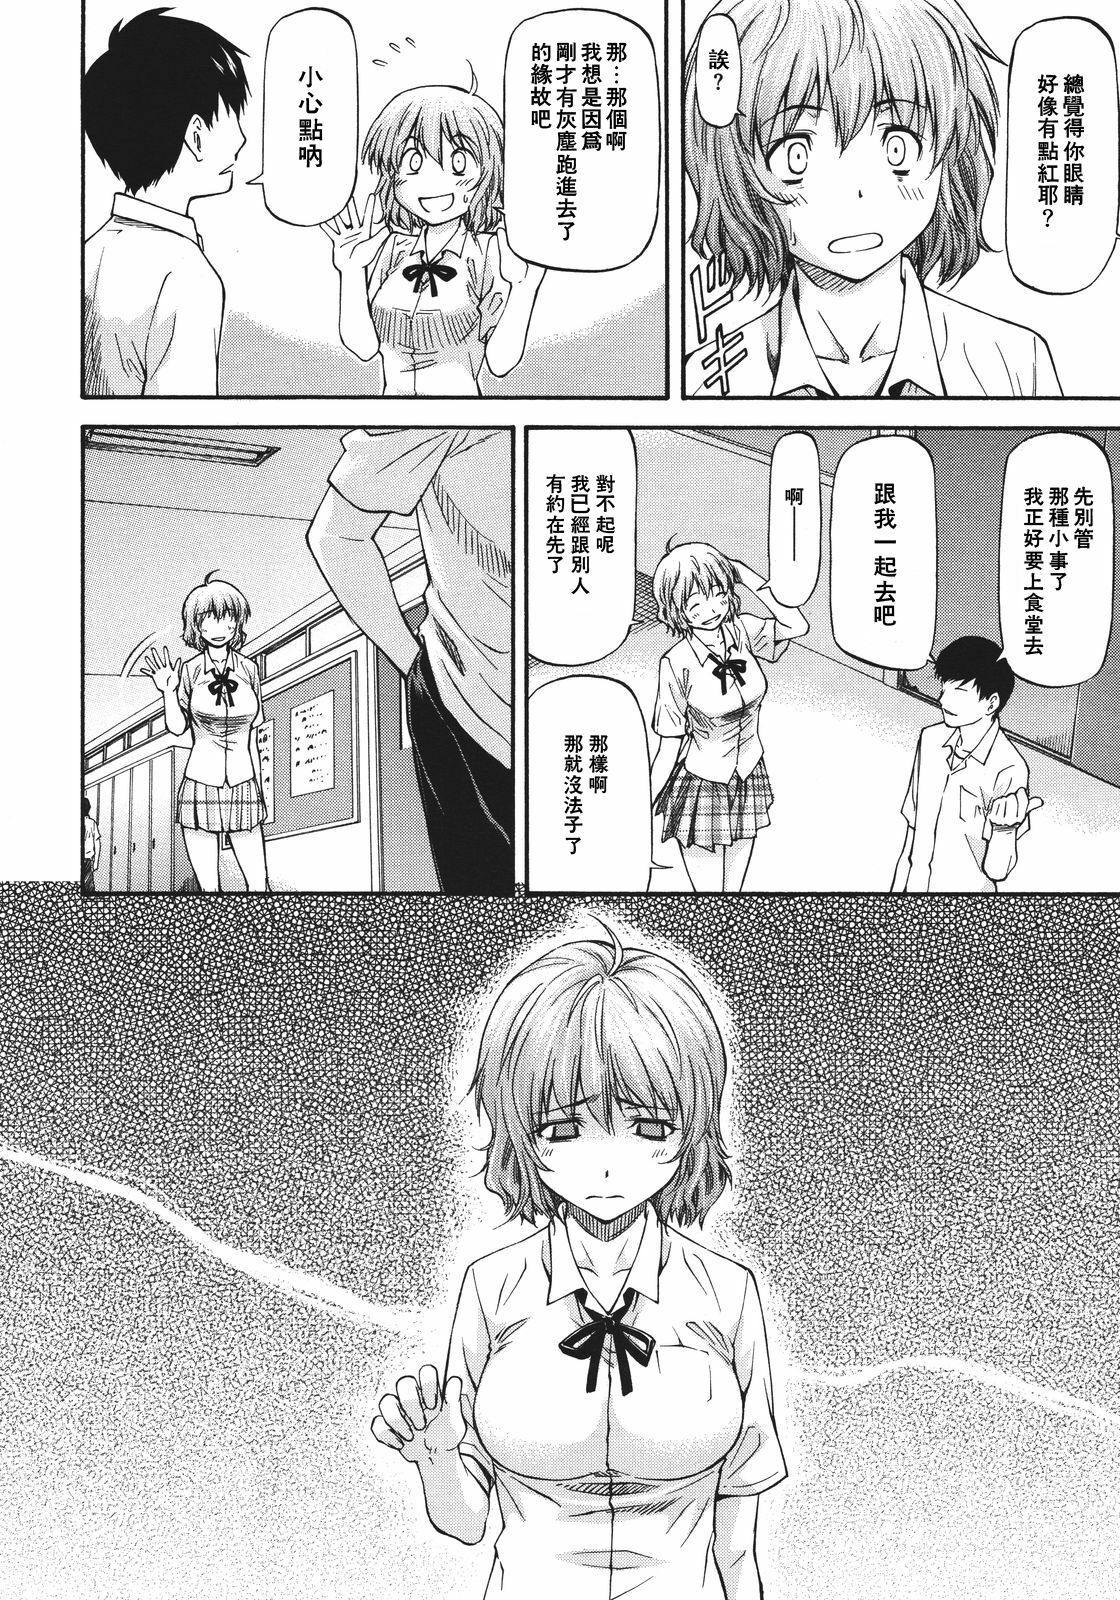 [Nagare Ippon] Bug Ch. 2 [Chinese] [流浪猫·里汉化组] page 4 full